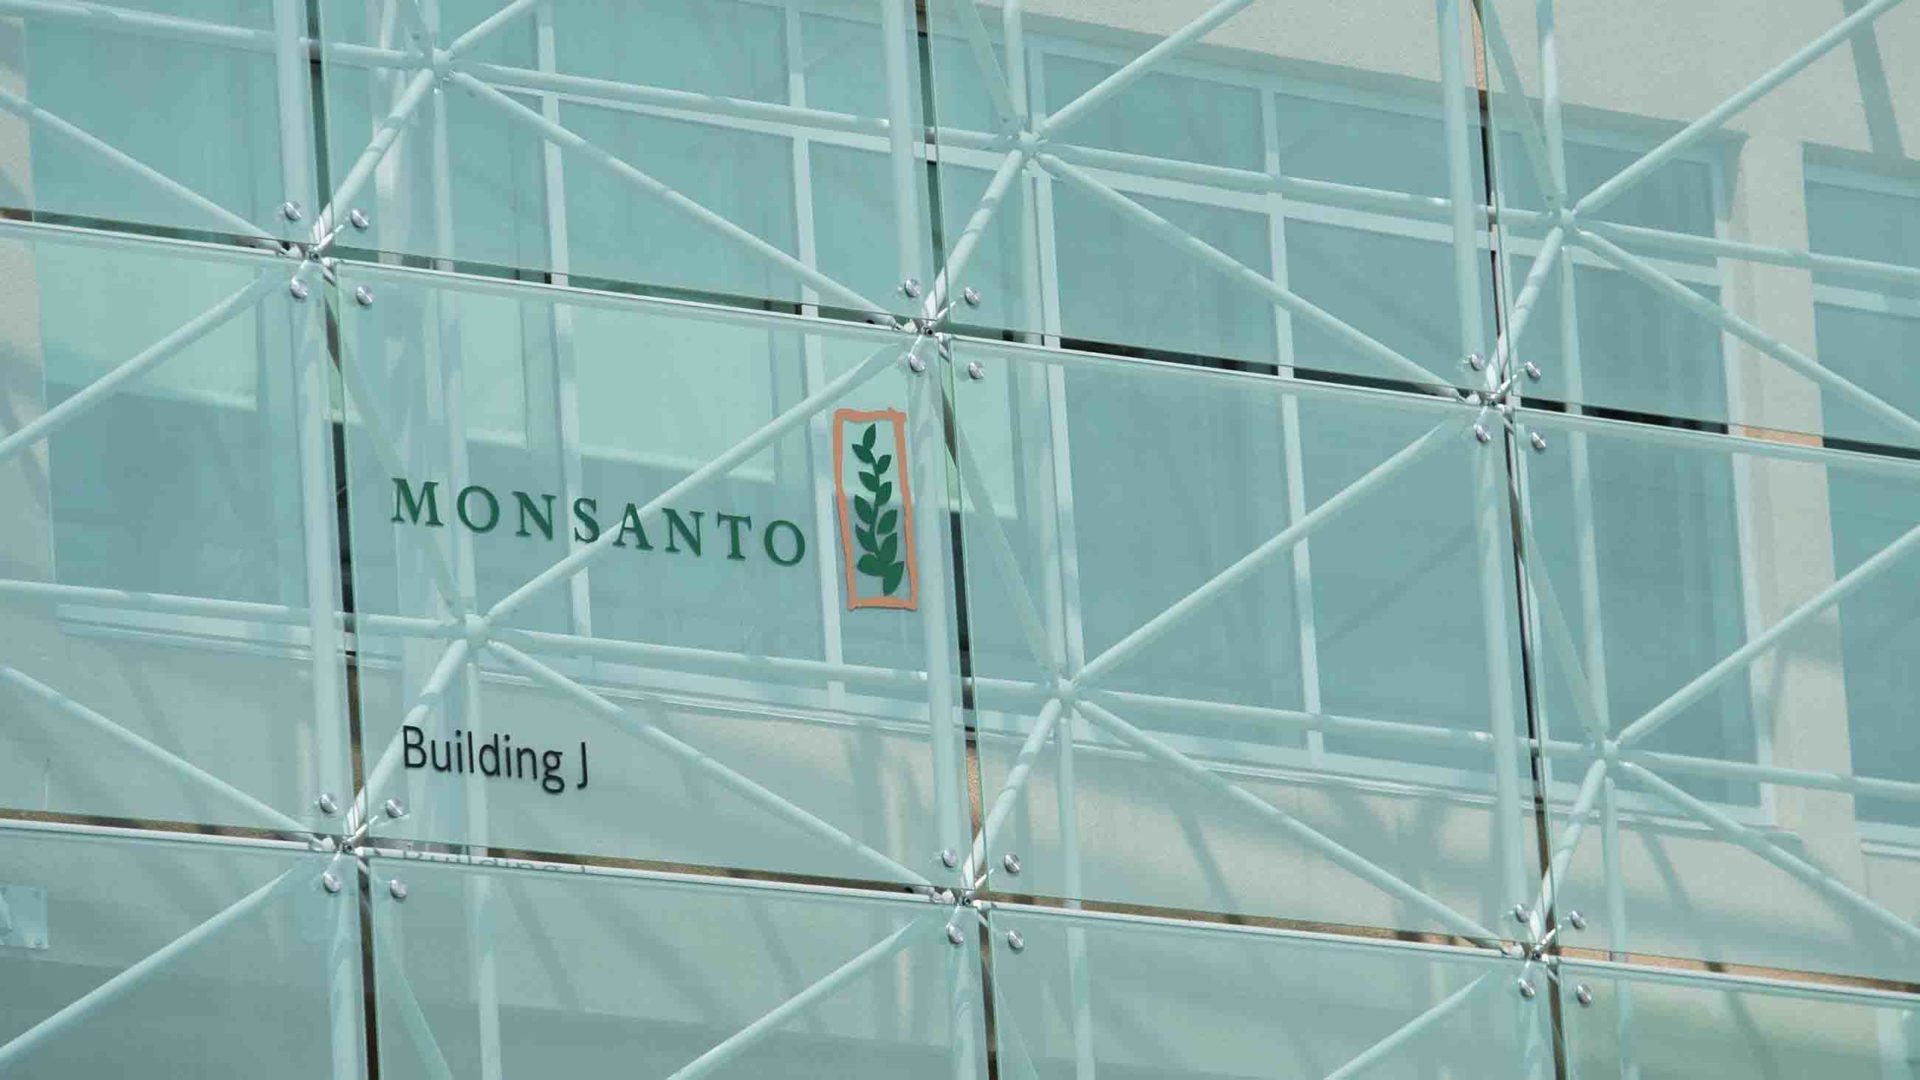 The controversial agricultural company Monsanto, acquired last June by Bayer, has become synonymous with genetically modified food.